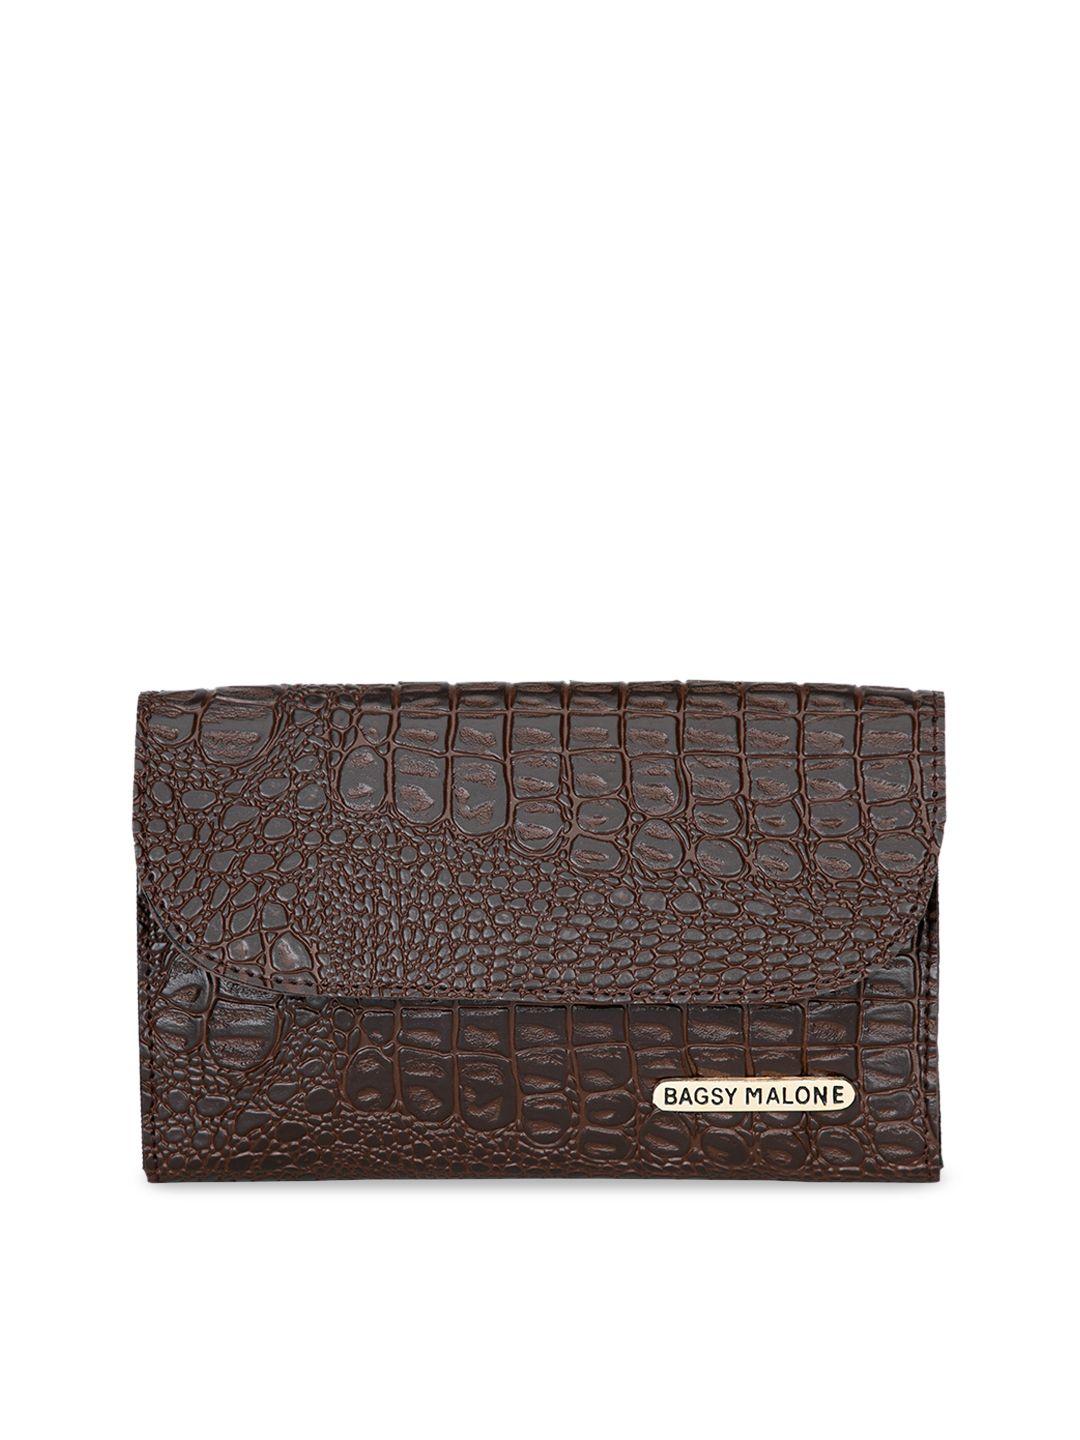 bagsy malone brown crocodile skin textured envelope clutches